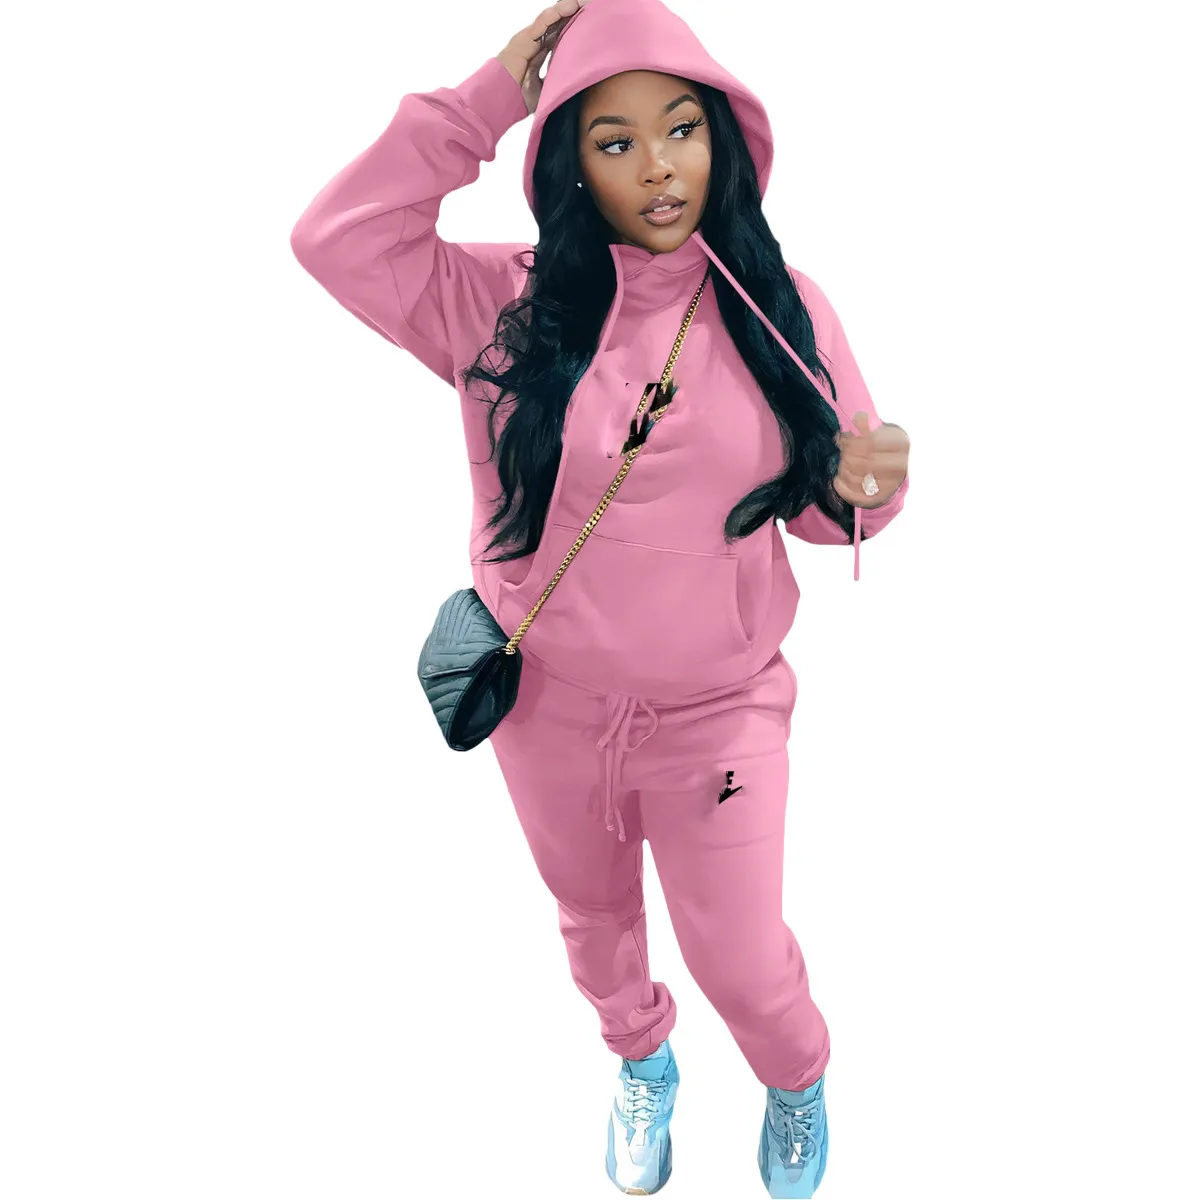 Womens Casual Sport Jogging Sweatsuit, Designer Hoodie Sweatshirt Pullover  And Pants Set From Fashion_gate, $25.93